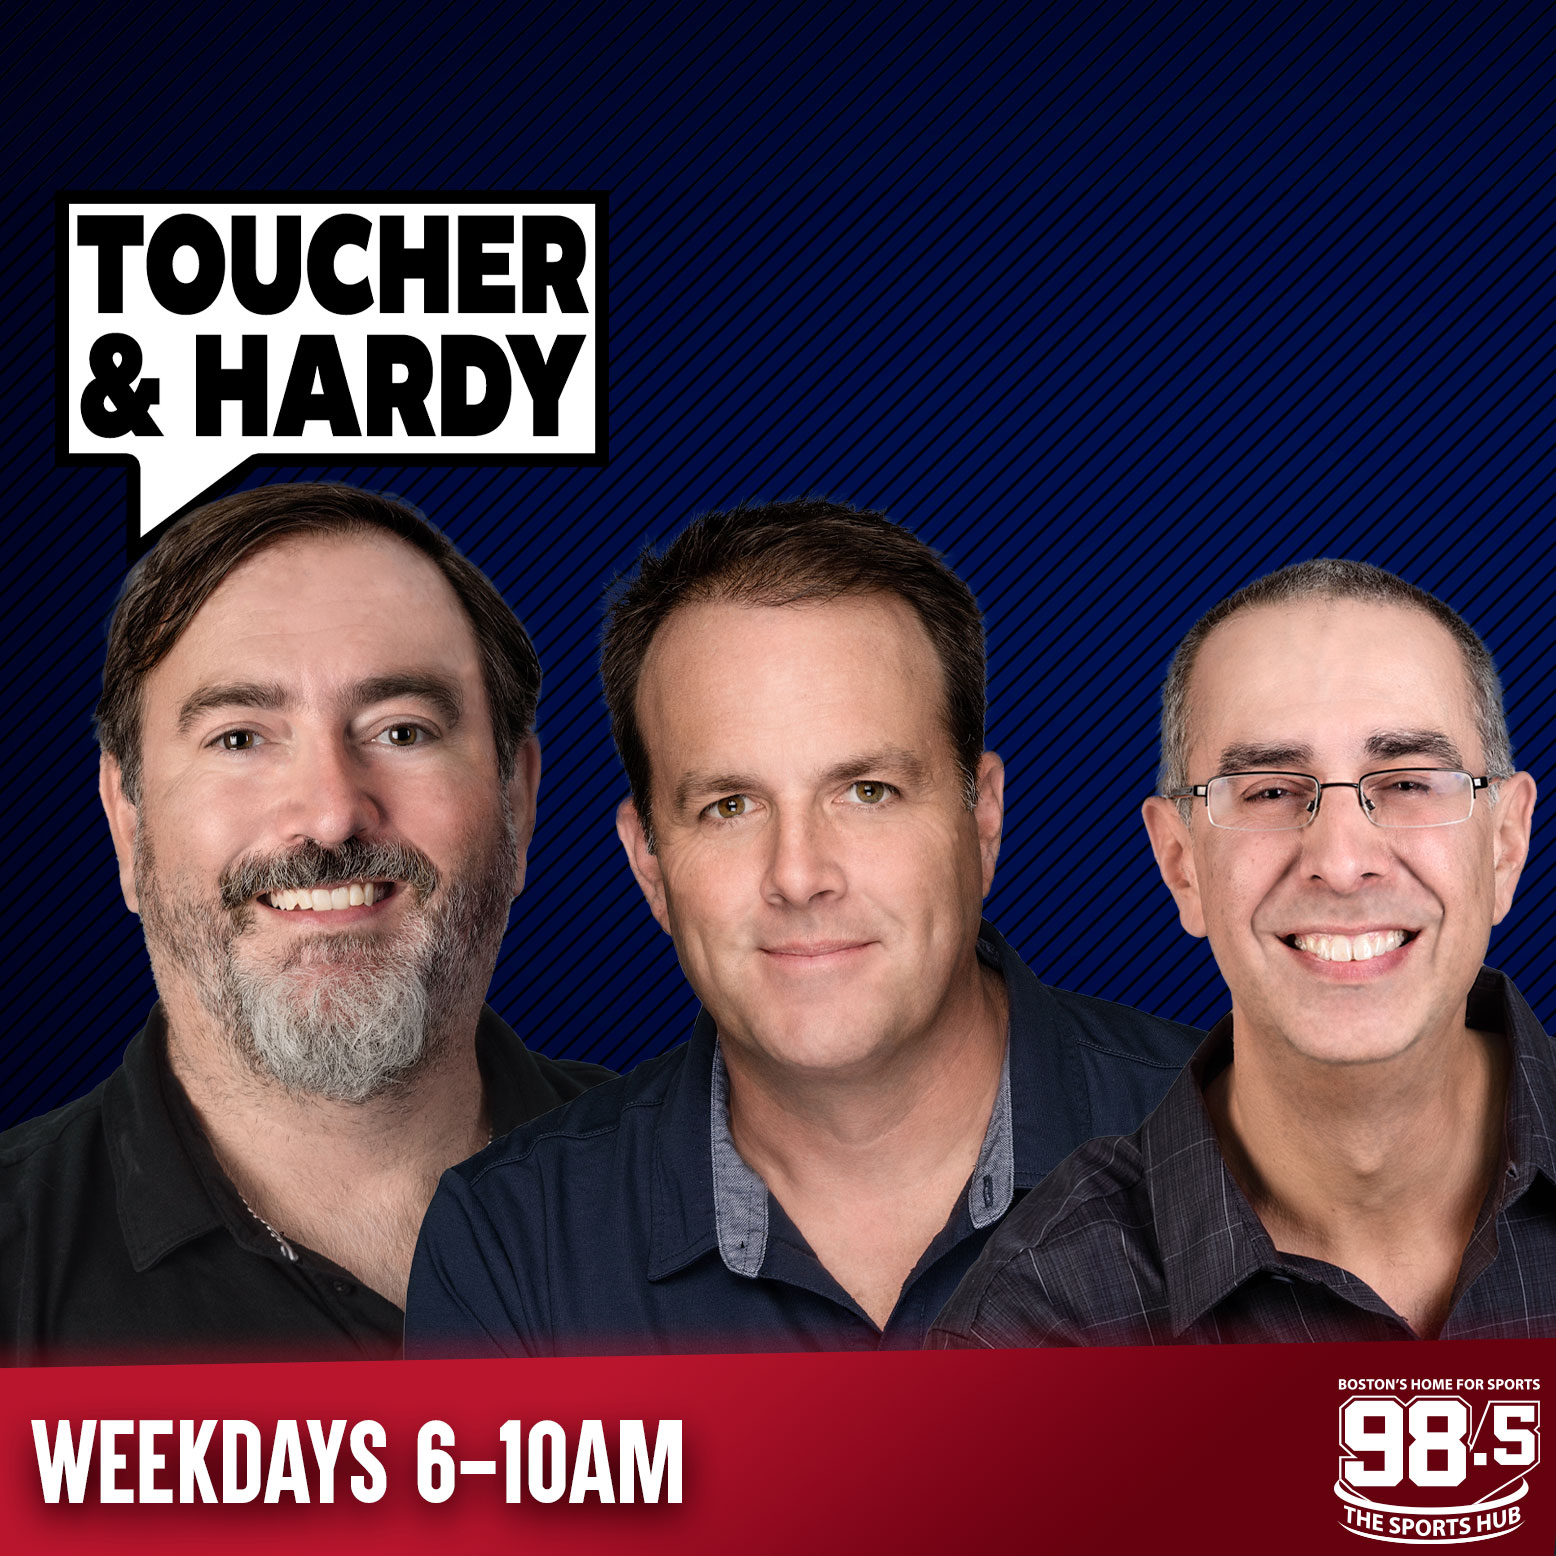 Big Booty Board Results | Mike Gorman joins Toucher & Hardy - 4/24 (Hour 3)